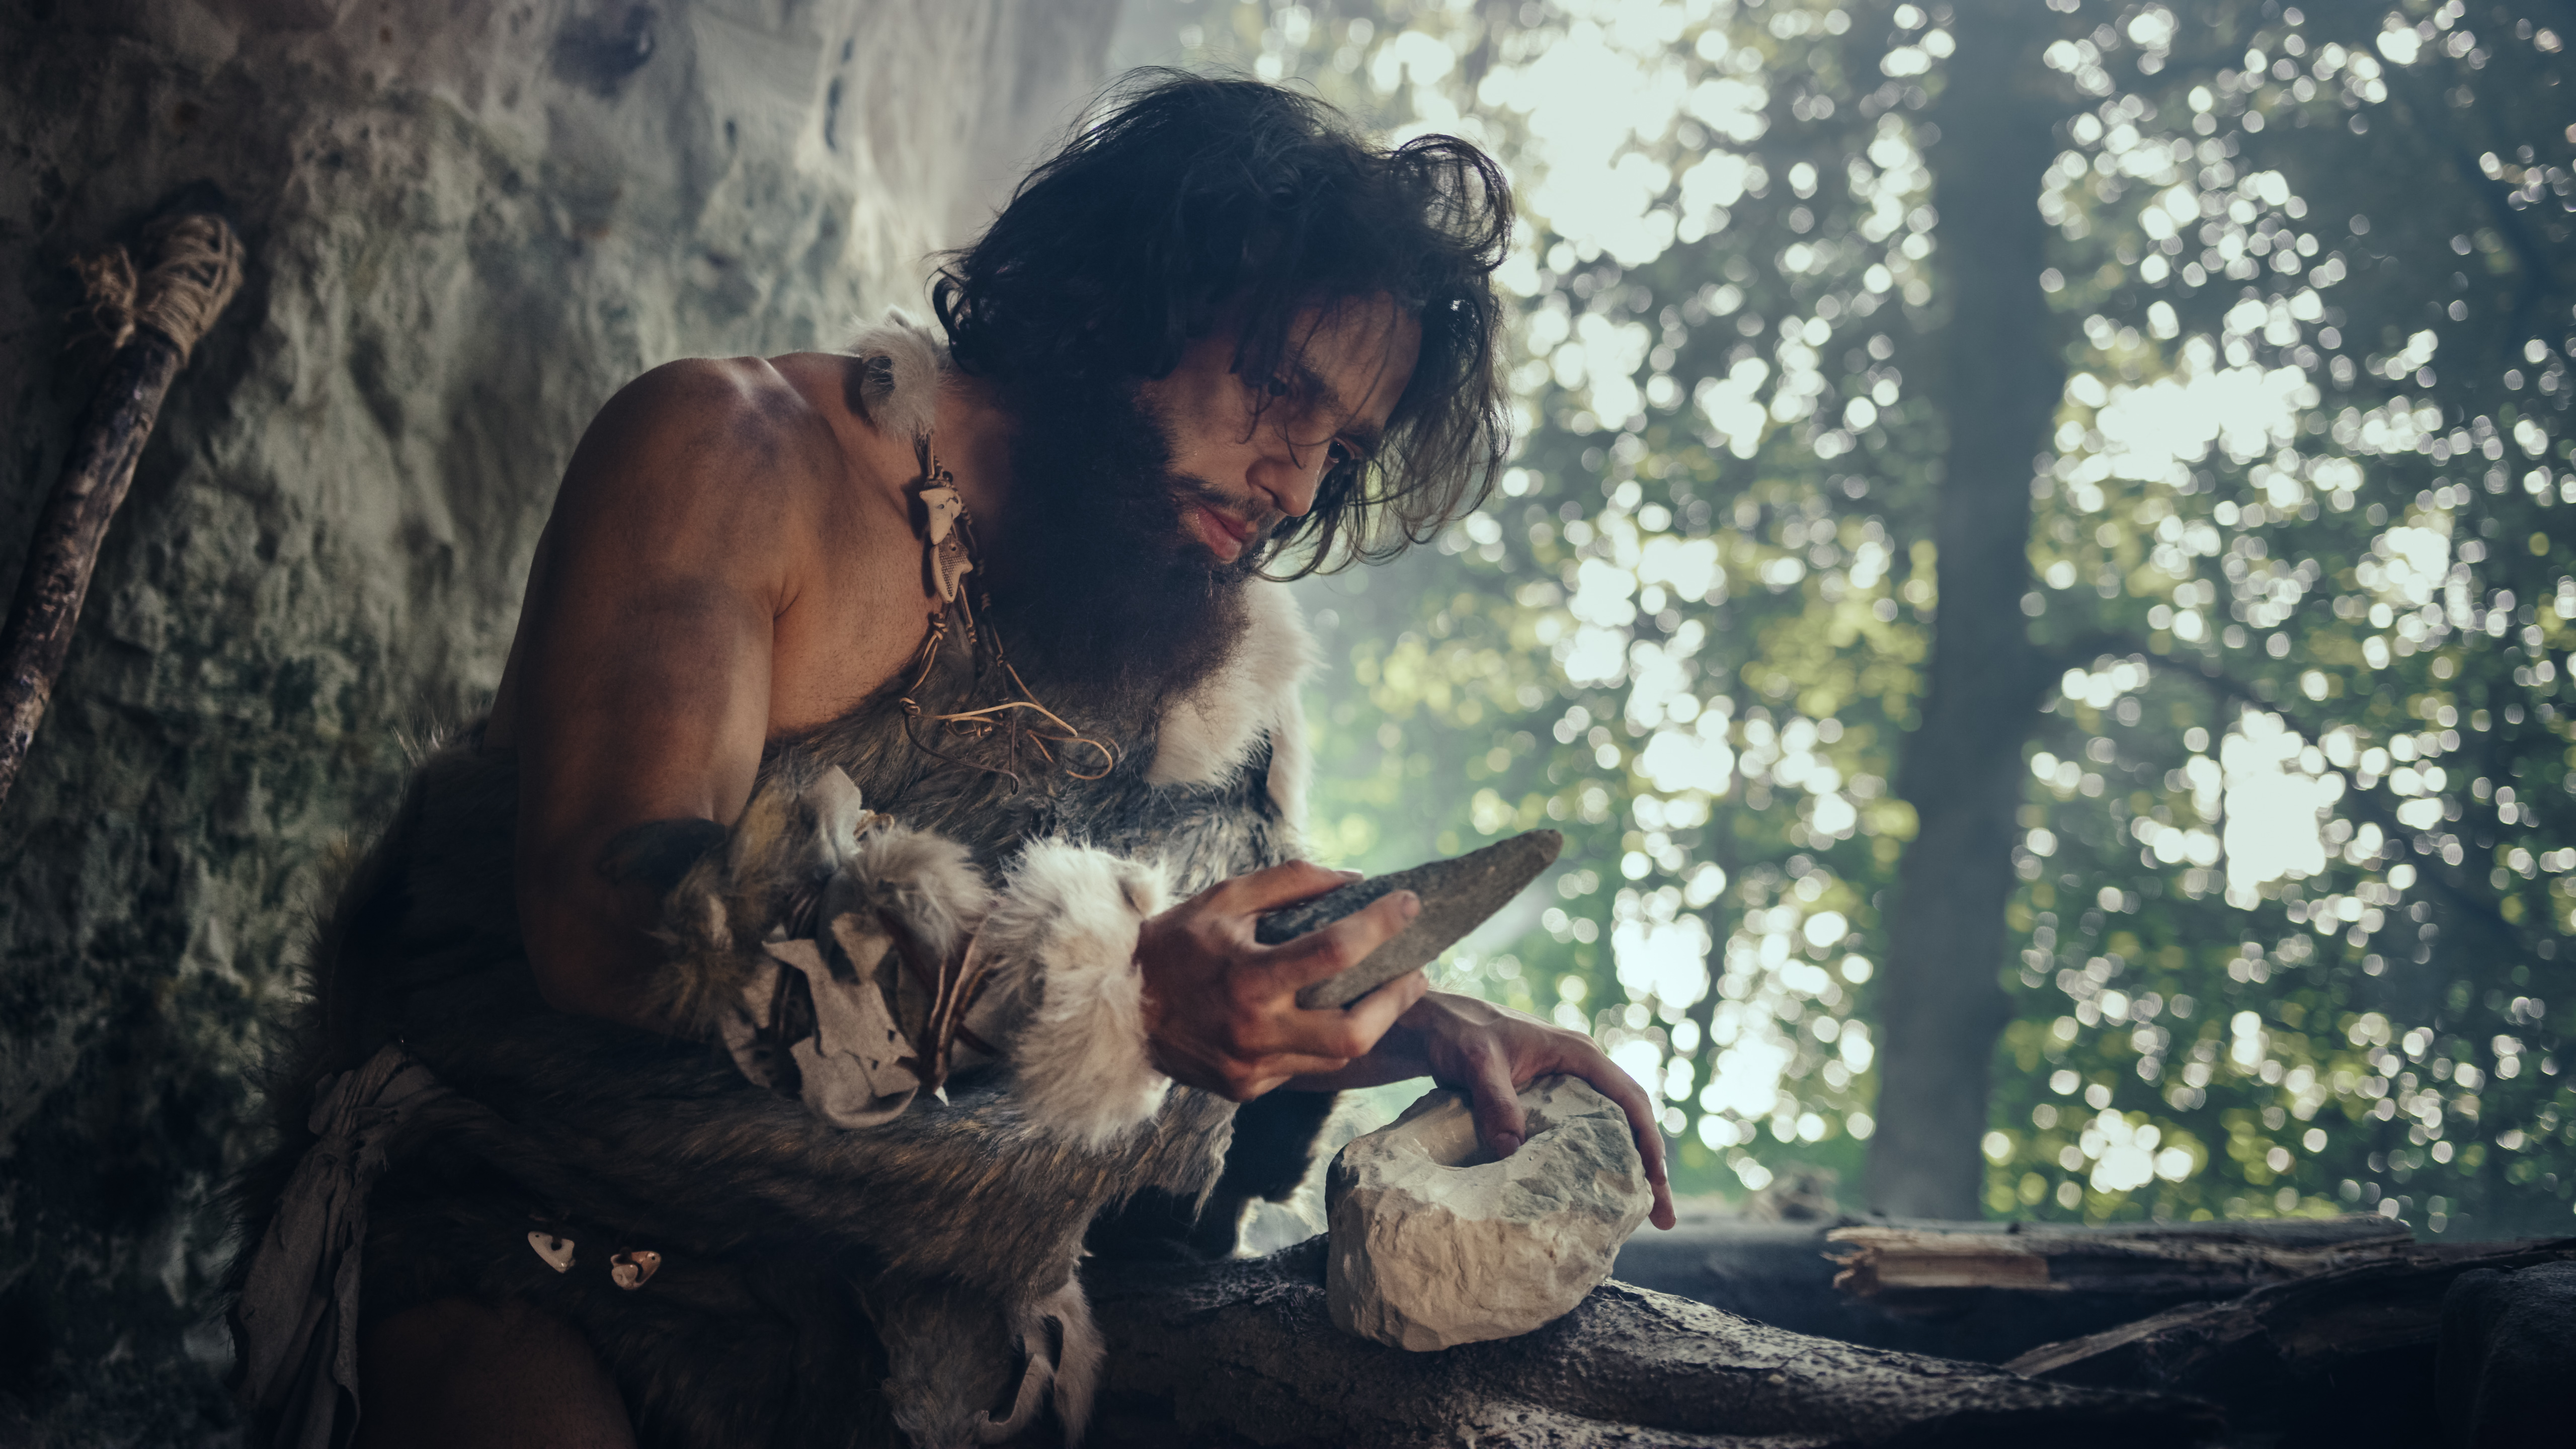 Ice Age Fashion: The Obscure Origins of Neanderthal Clothing